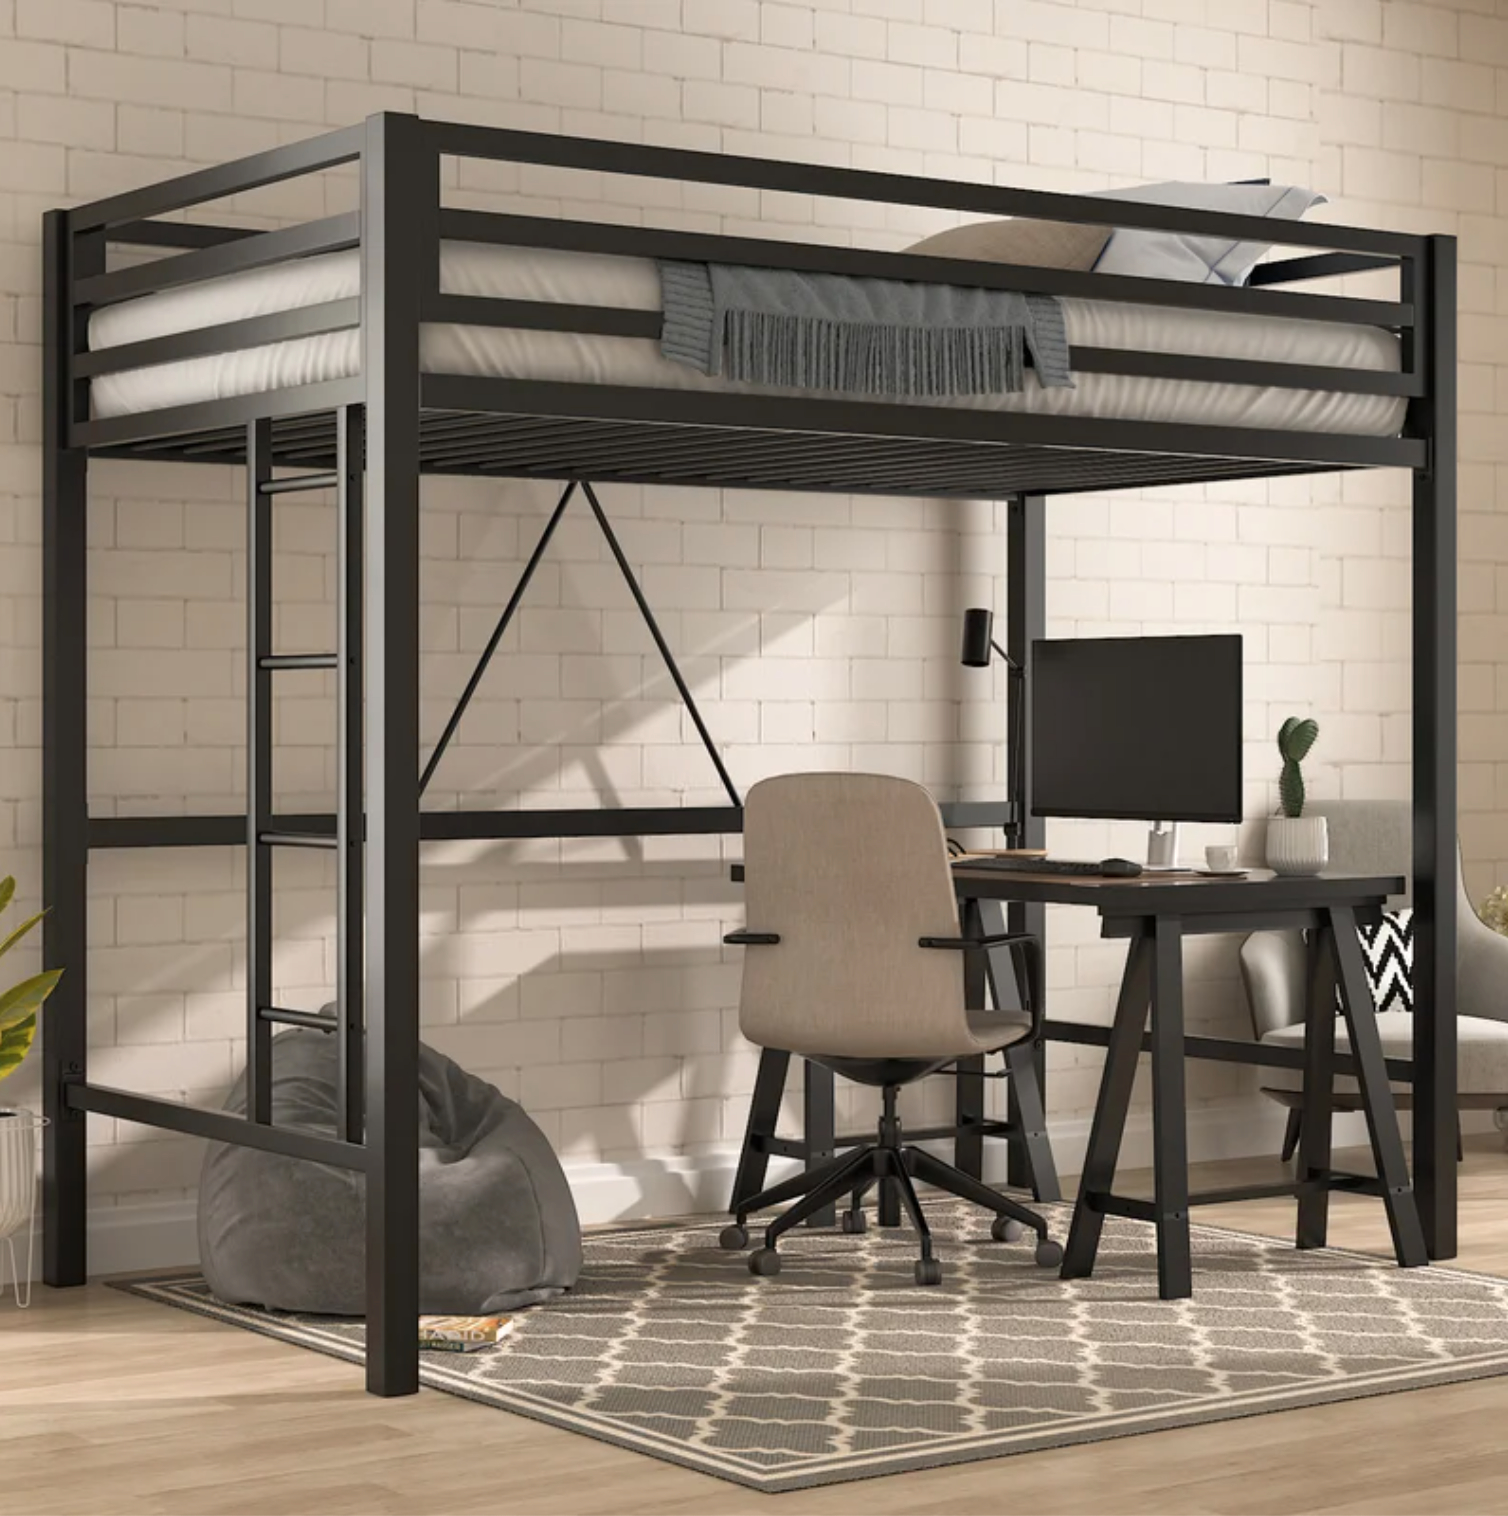 a black lofted bed frame with a desk set up and beanbag chair below it